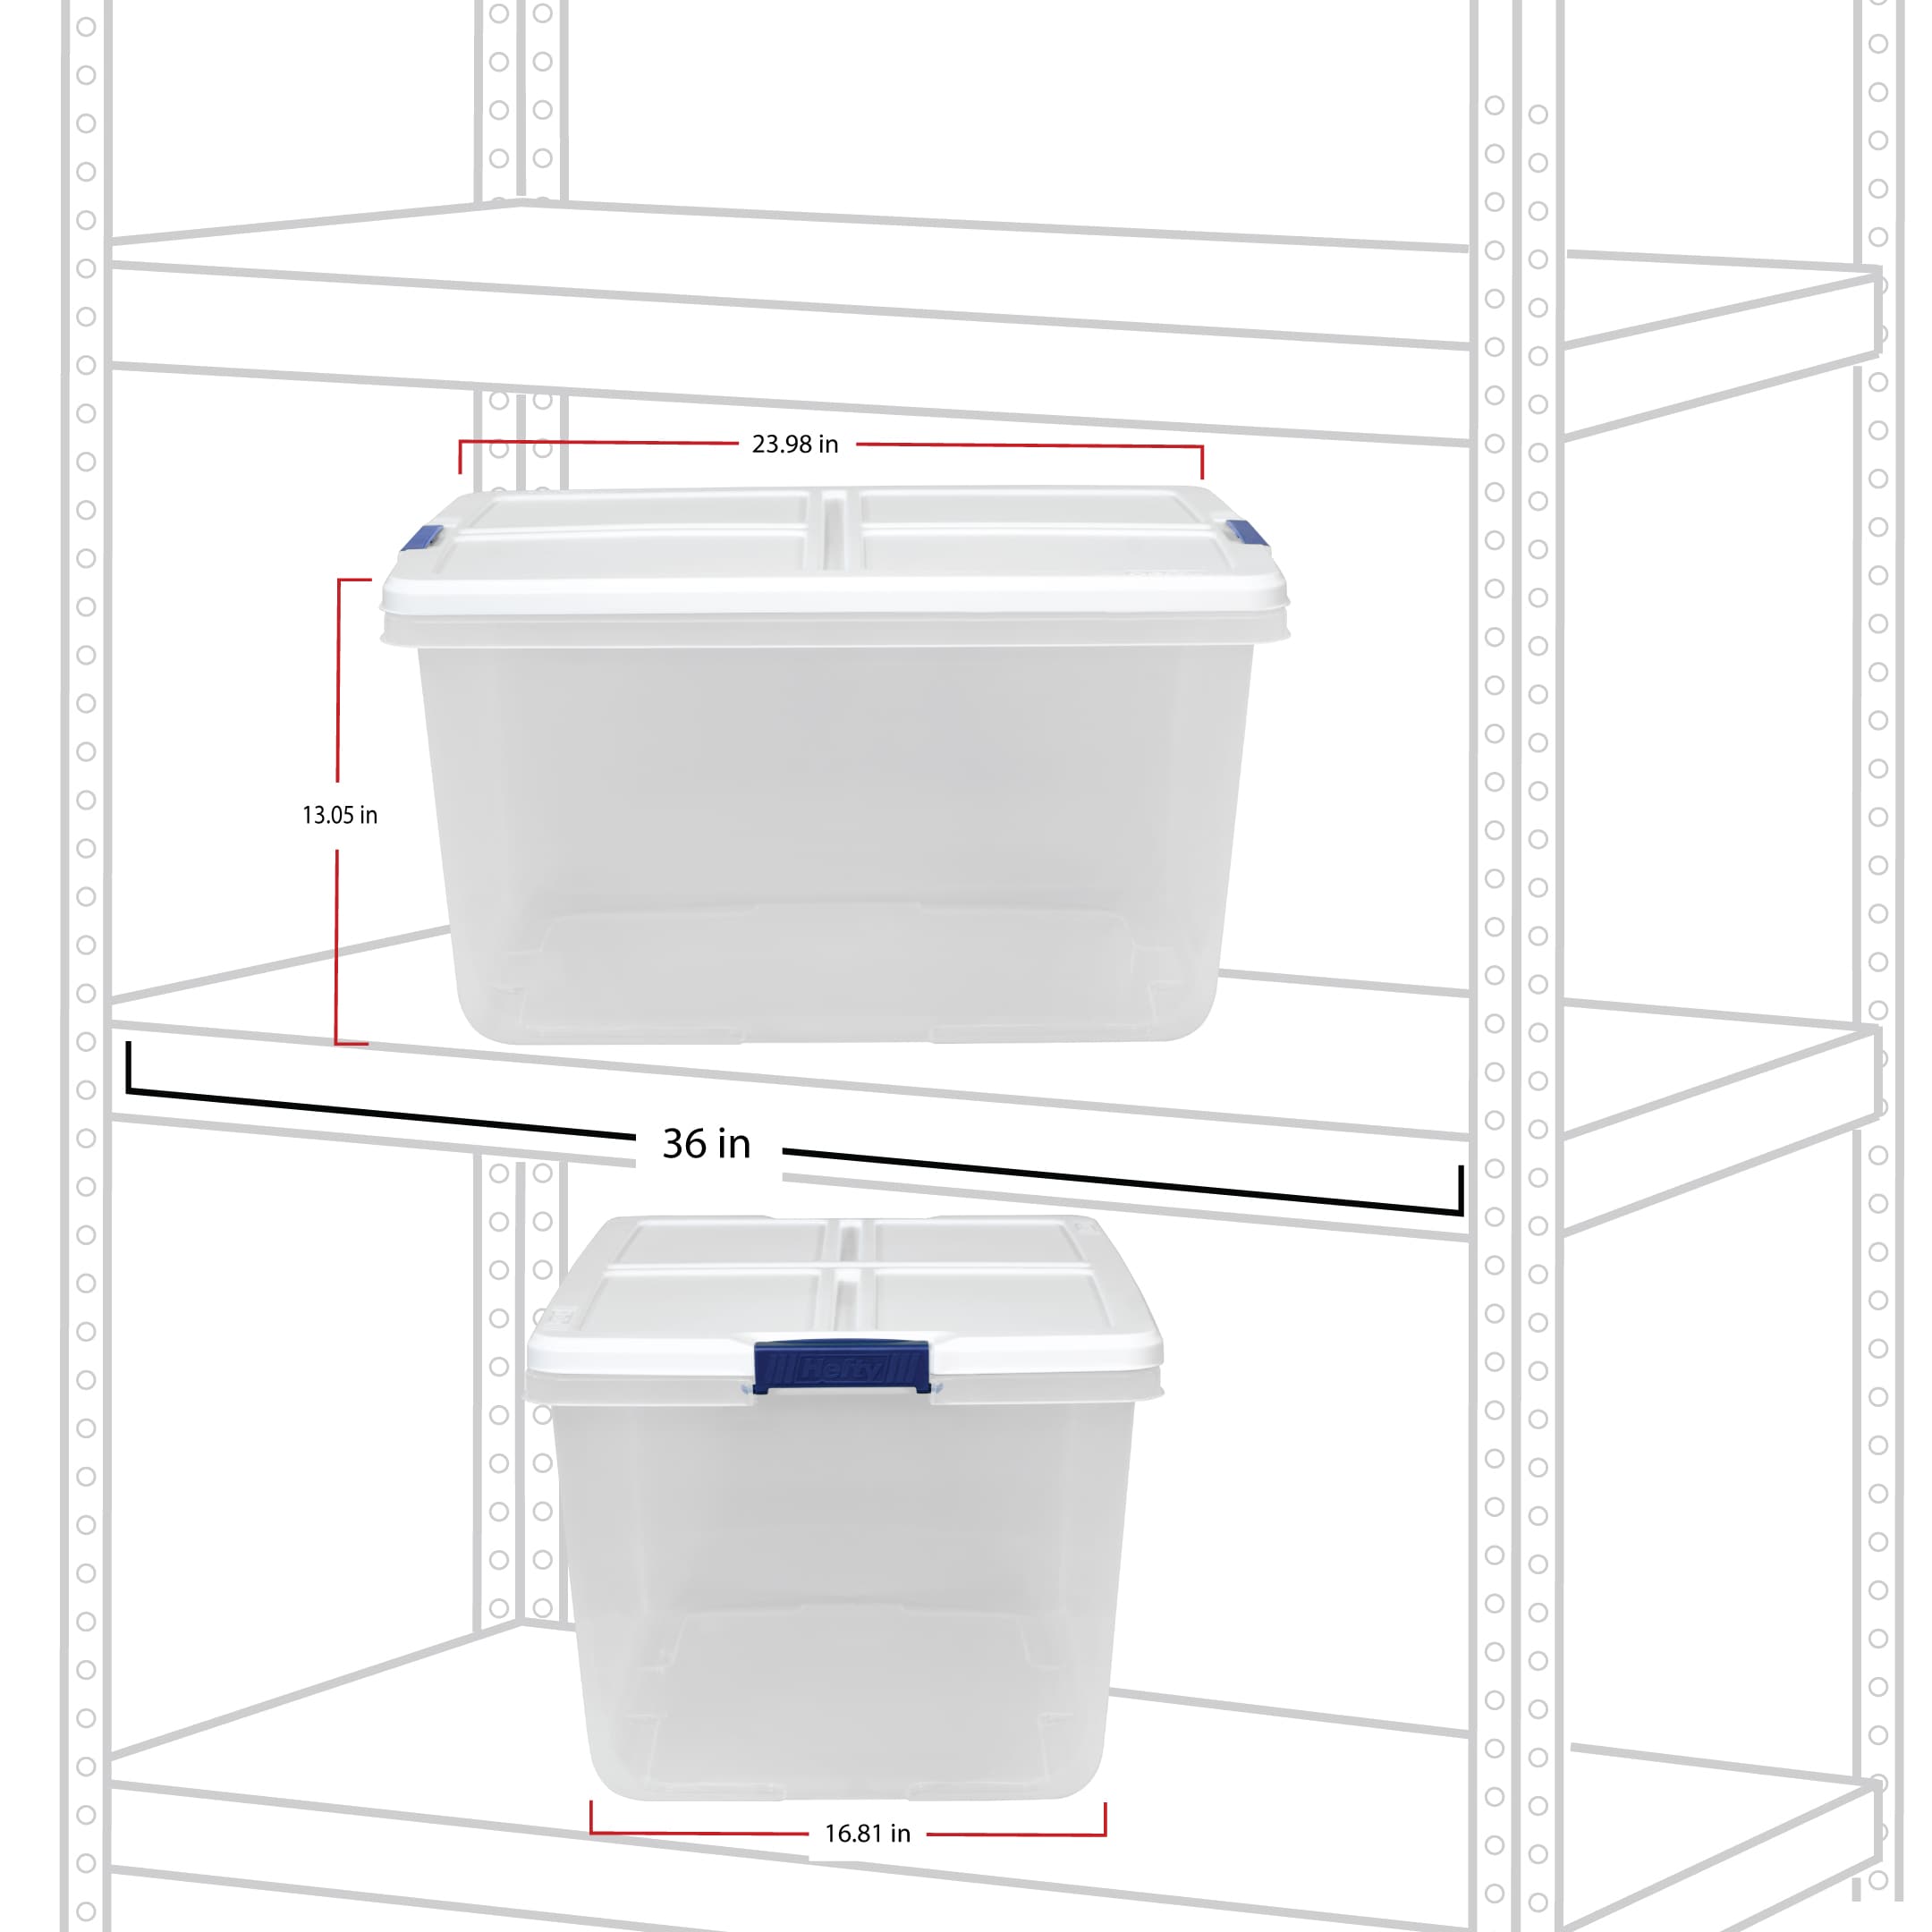 Hefty 66-Quart Tote with Lid + Free 15-Quart Tote ONLY $9.98